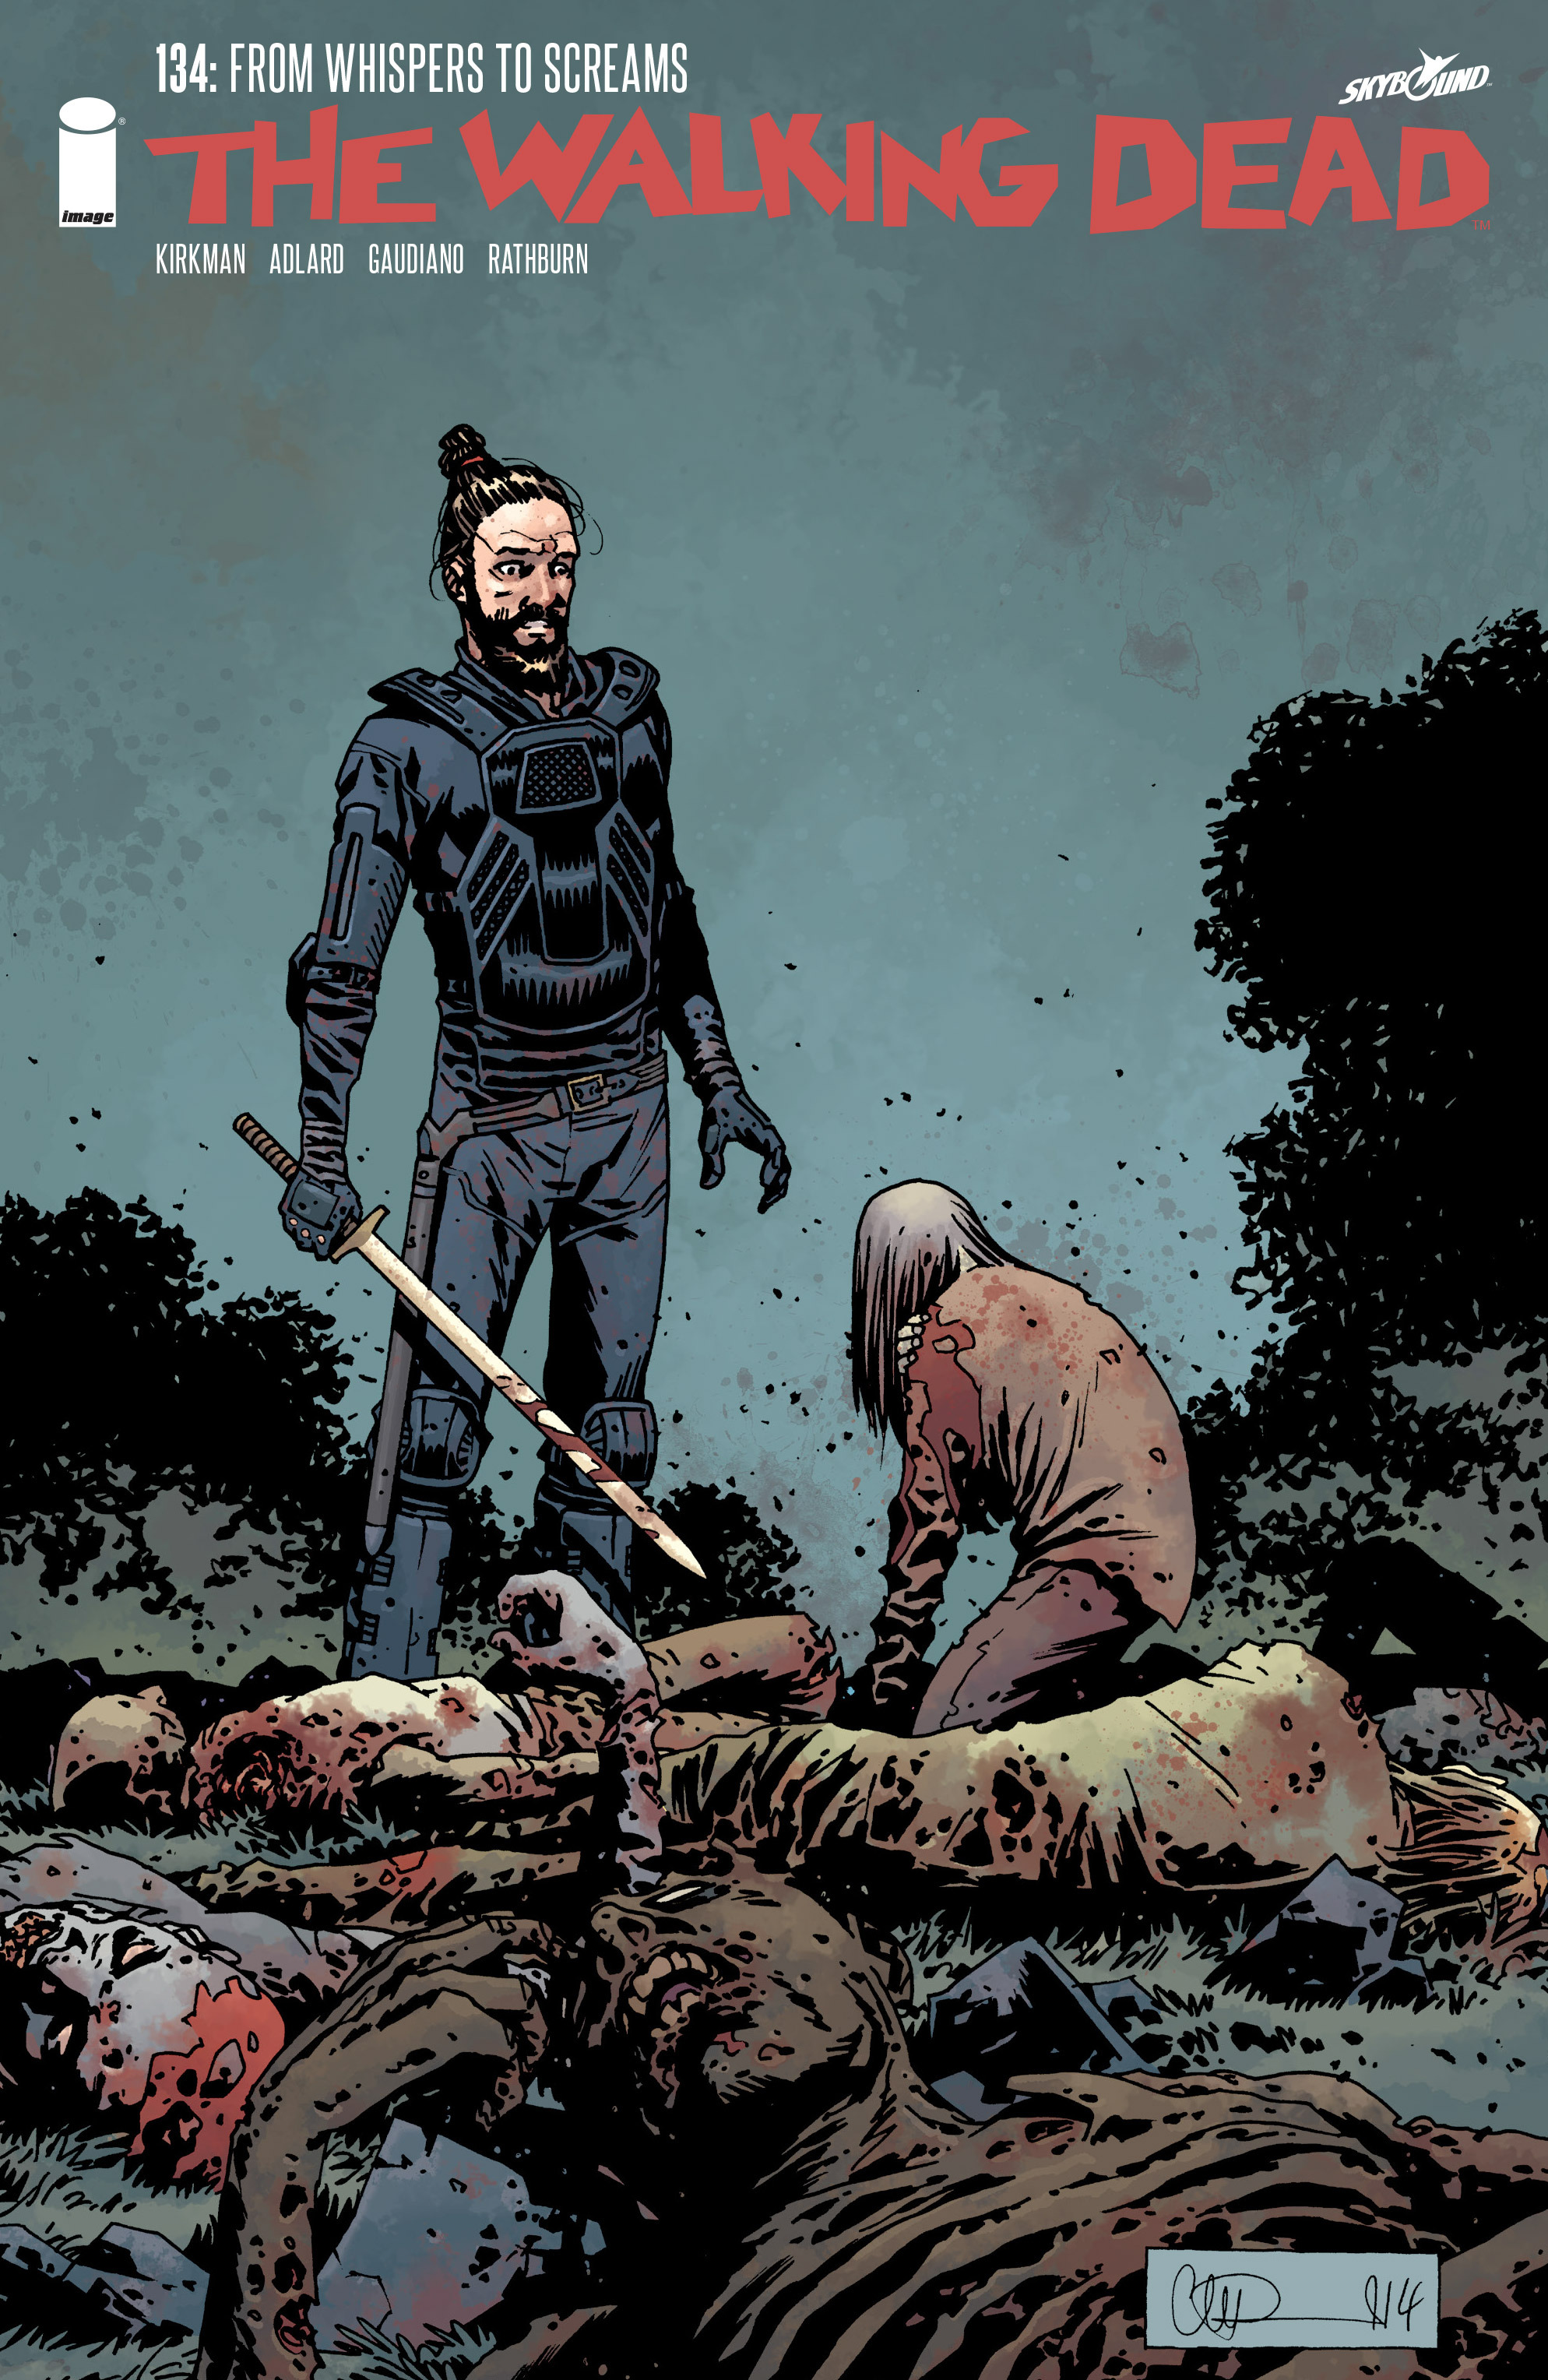 The Walking Dead 134 Page 1